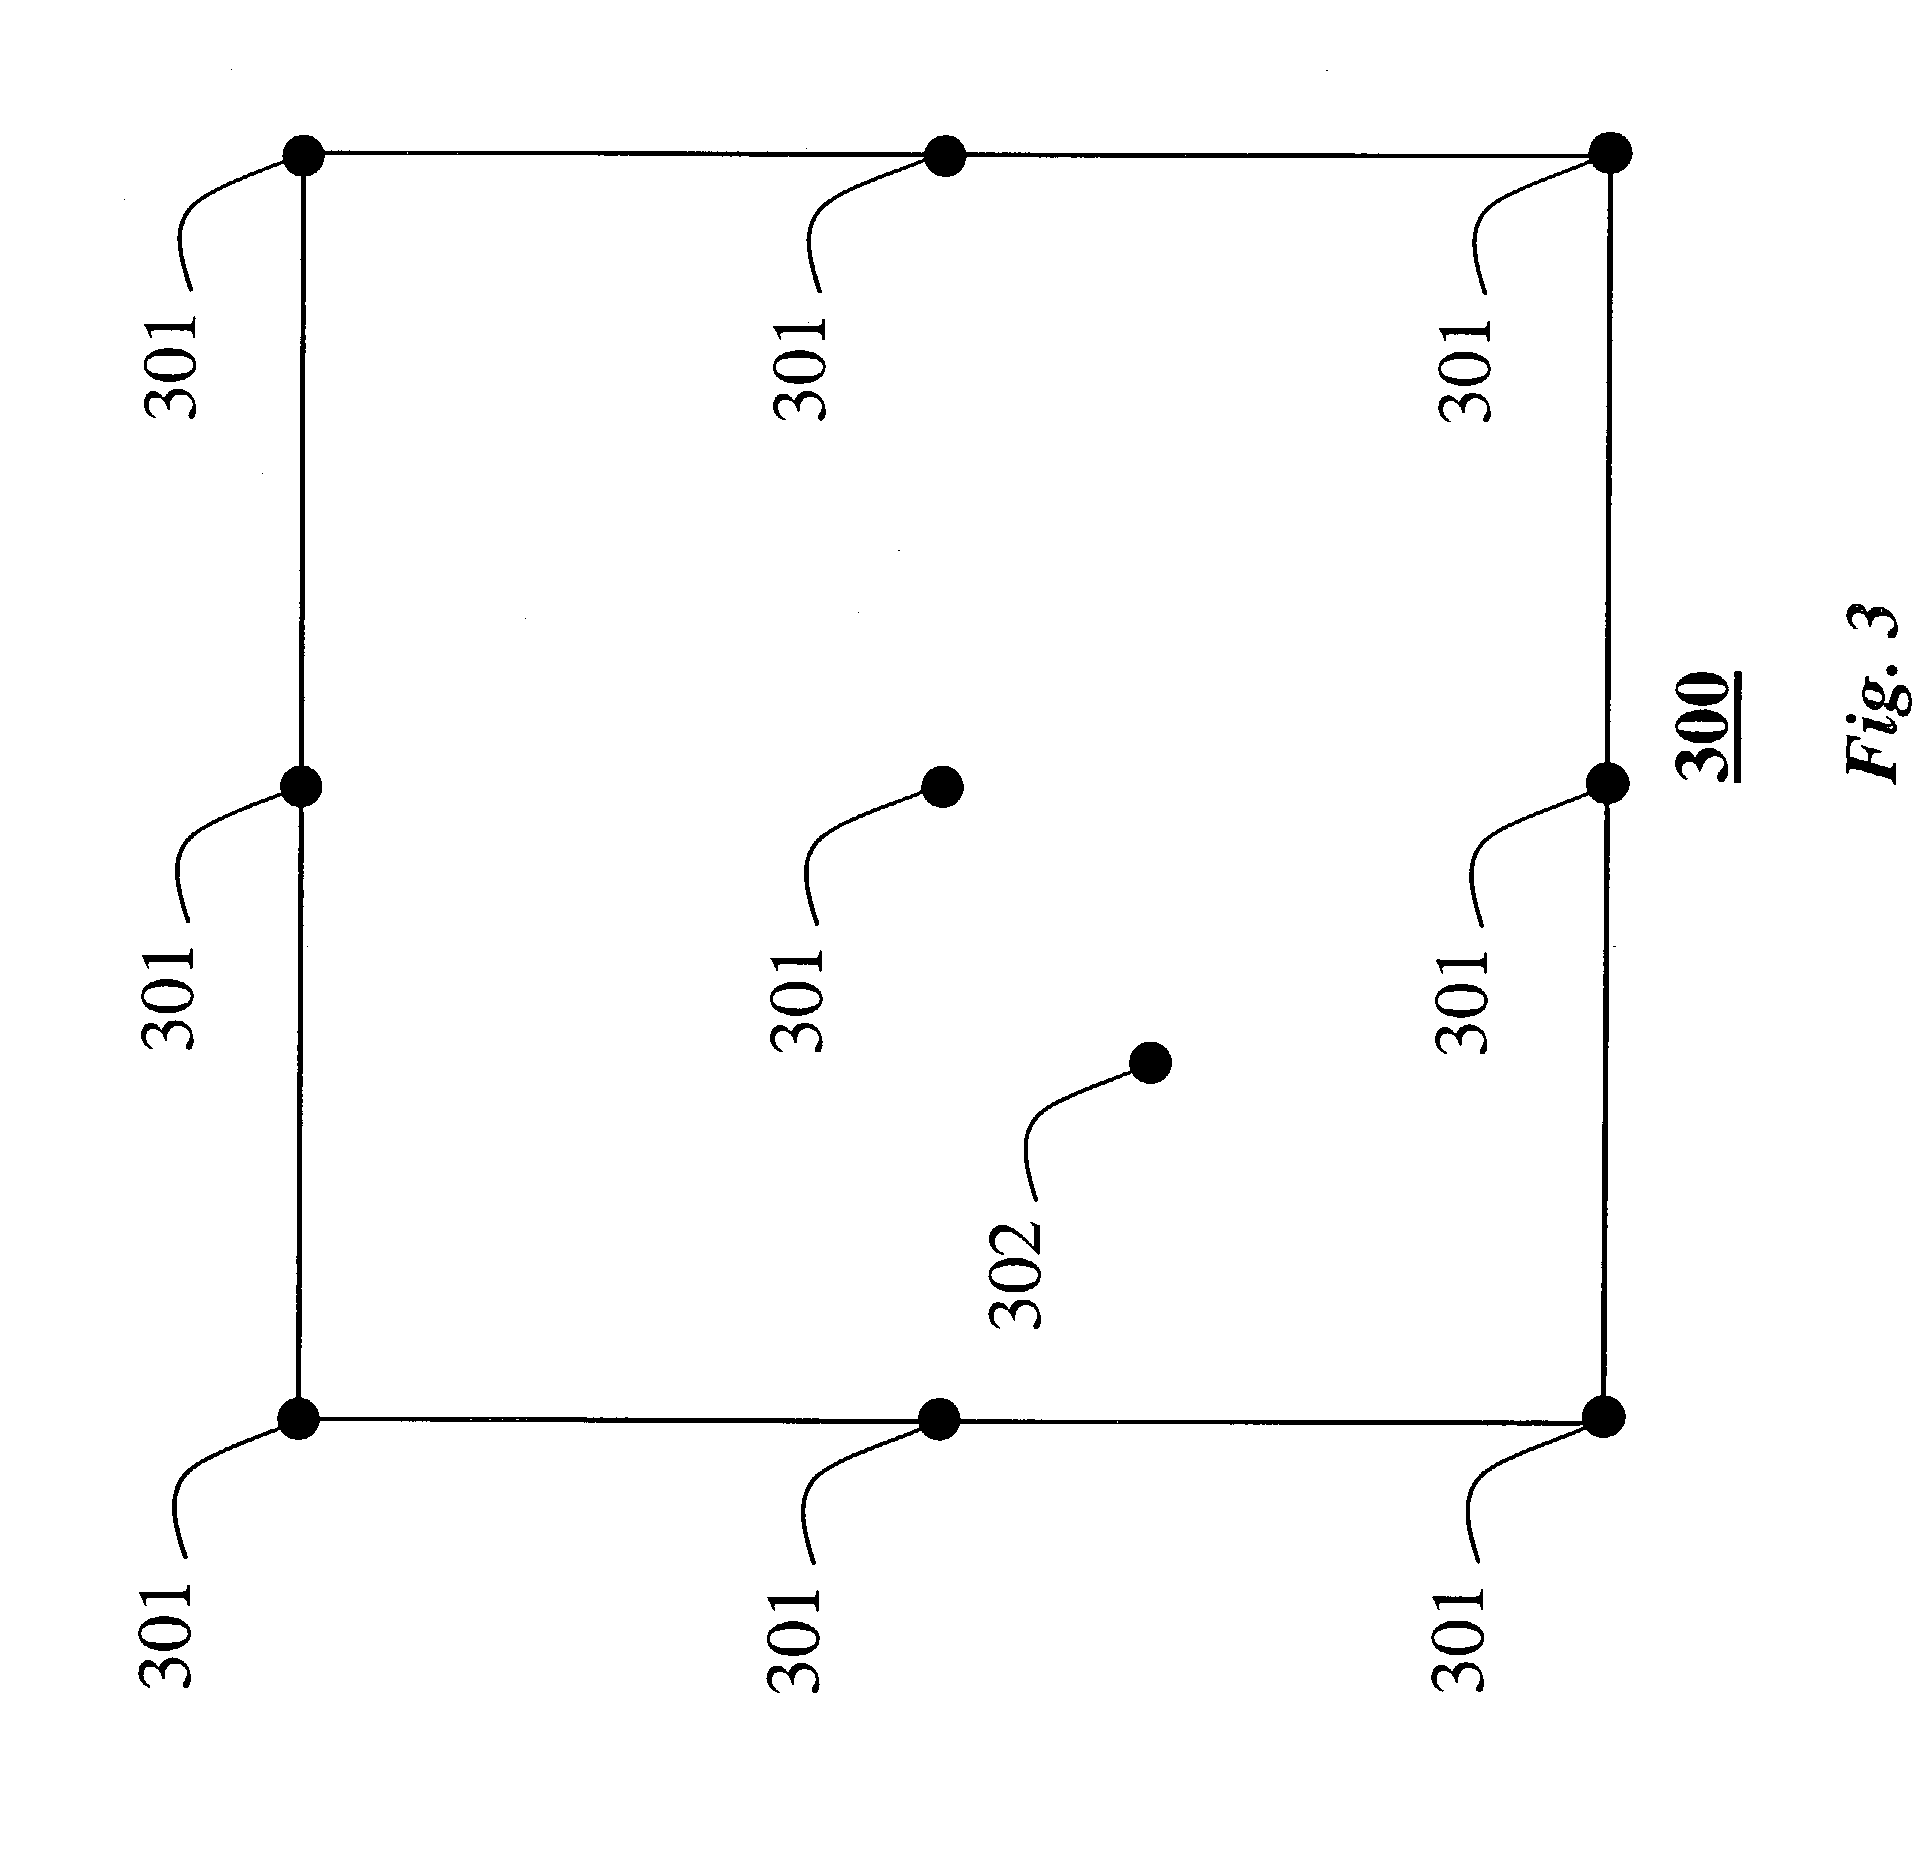 Method for antialiasing an object represented as a two-dimensional distance field in image-order